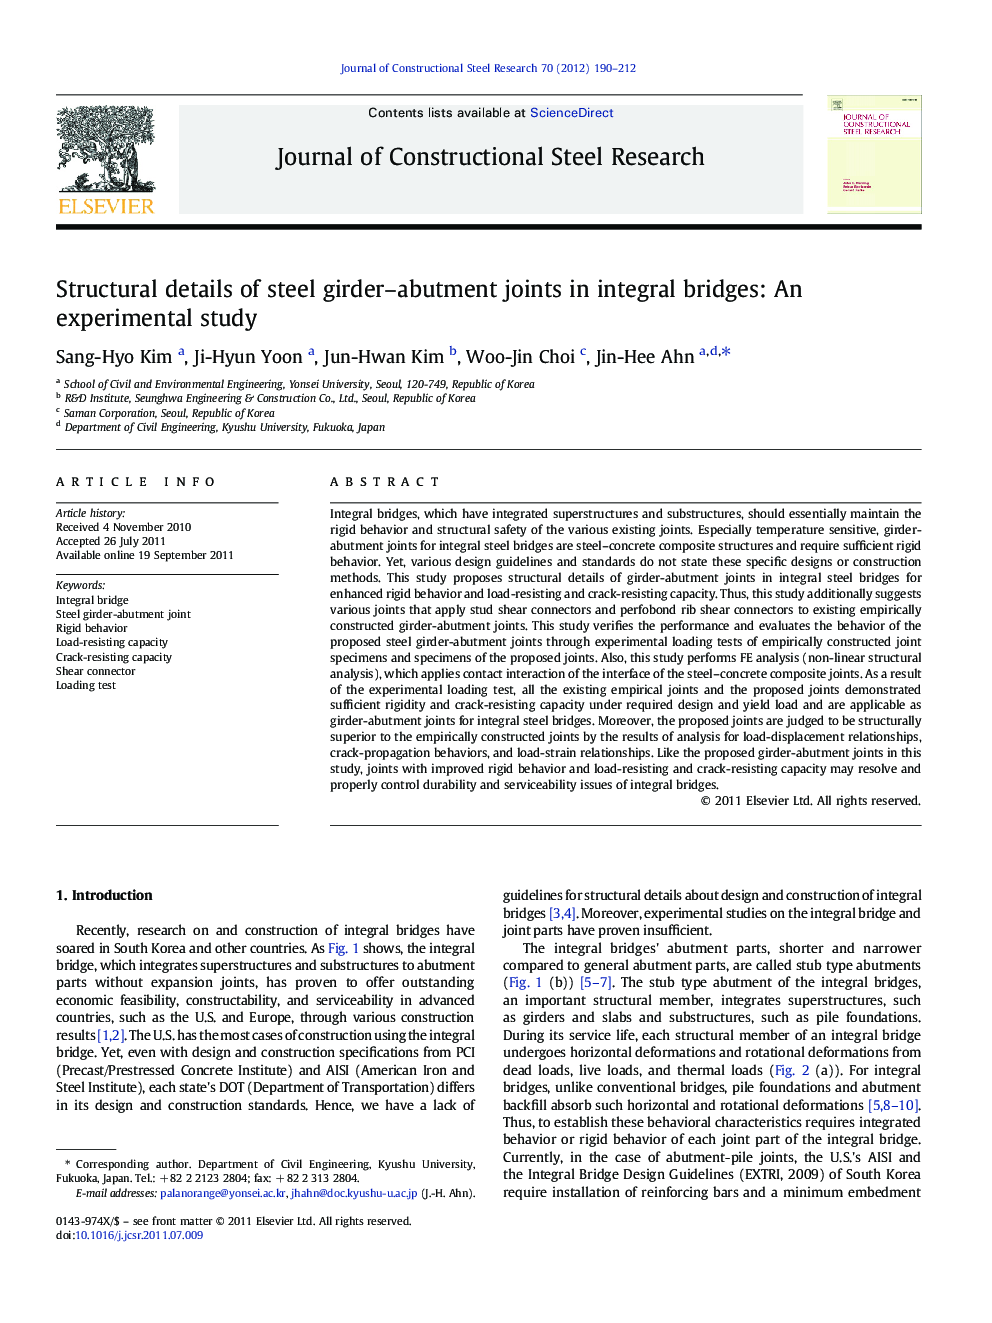 Structural details of steel girder–abutment joints in integral bridges: An experimental study